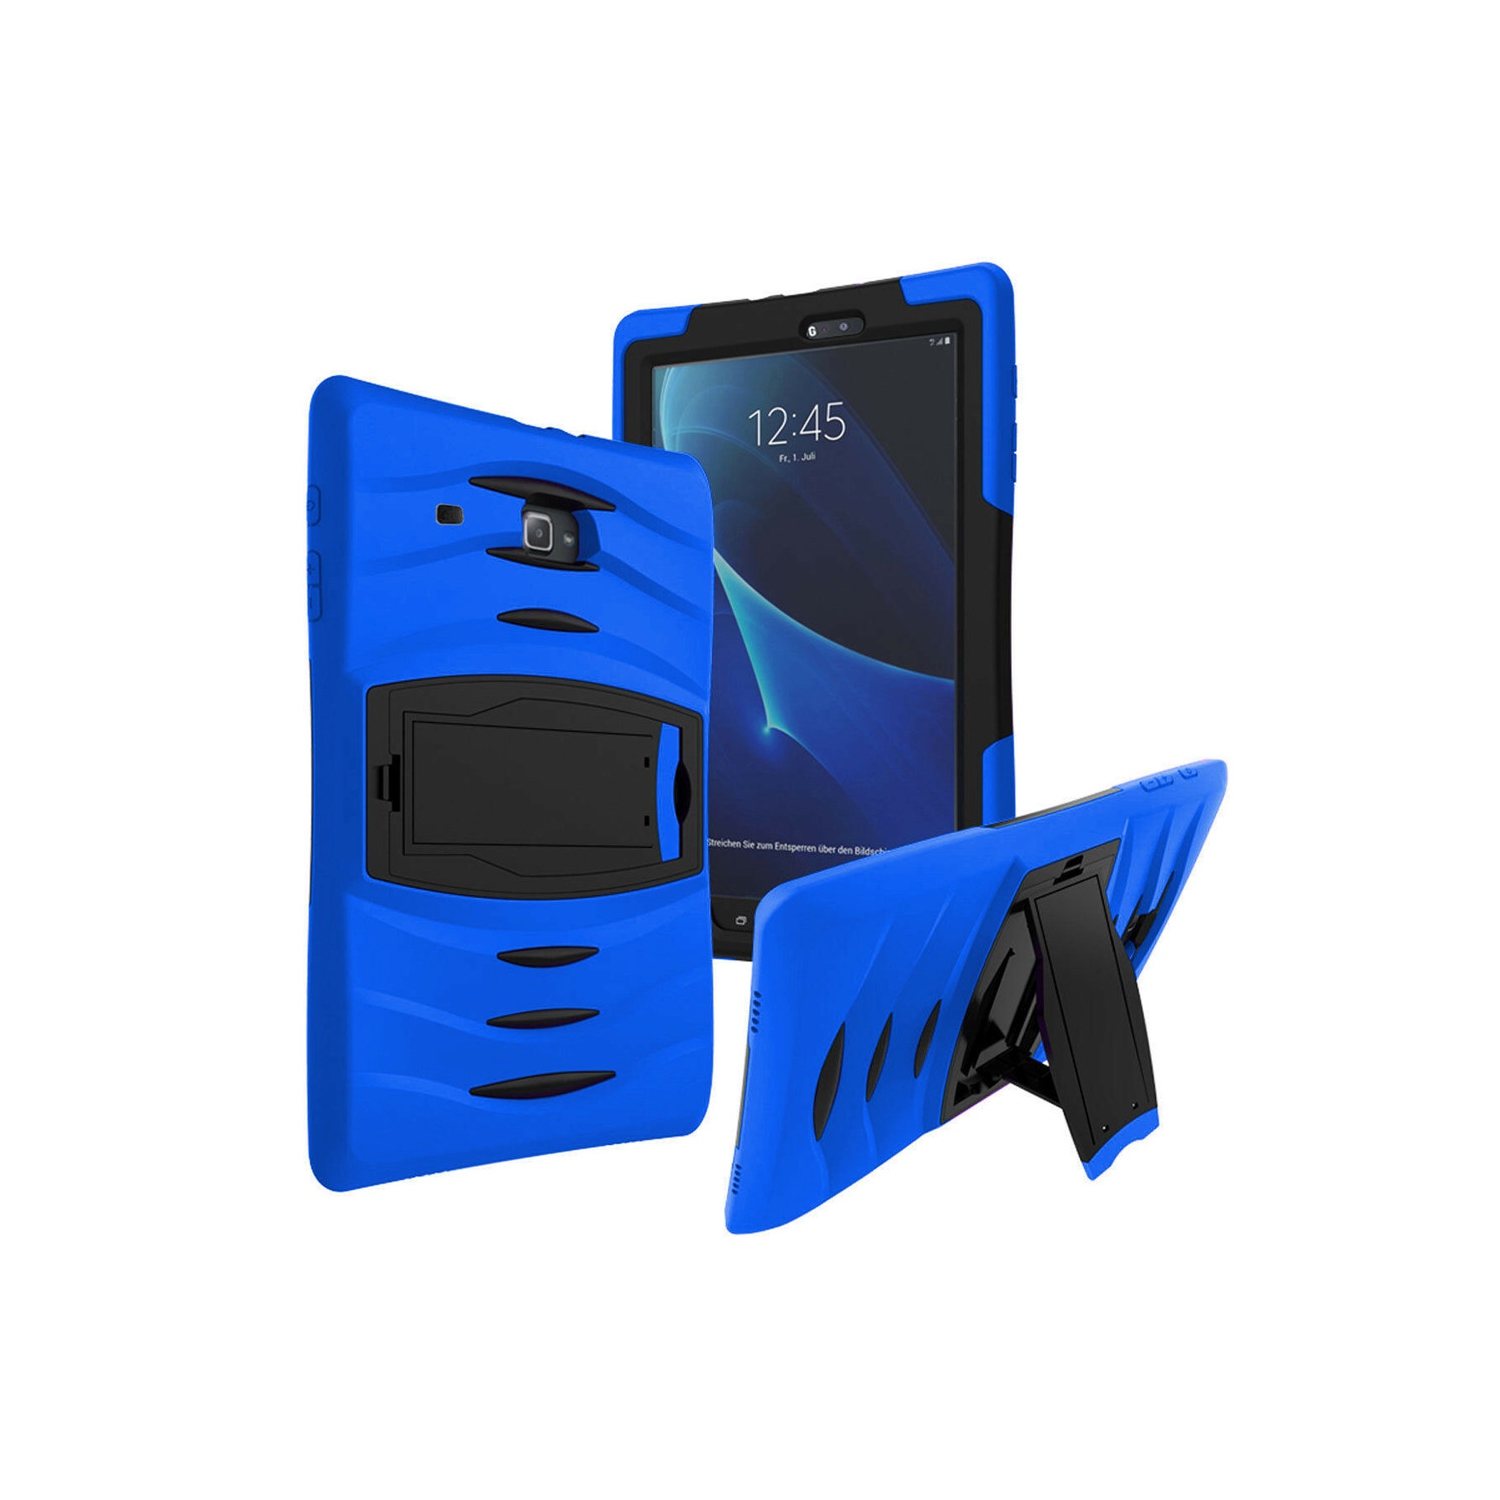 【CSmart】 Shockproof Heavy Duty Rugged Defender Case Kickstand Cover for Samsung Tab E Lite 7.0", T110 / T111 / T113, Blue